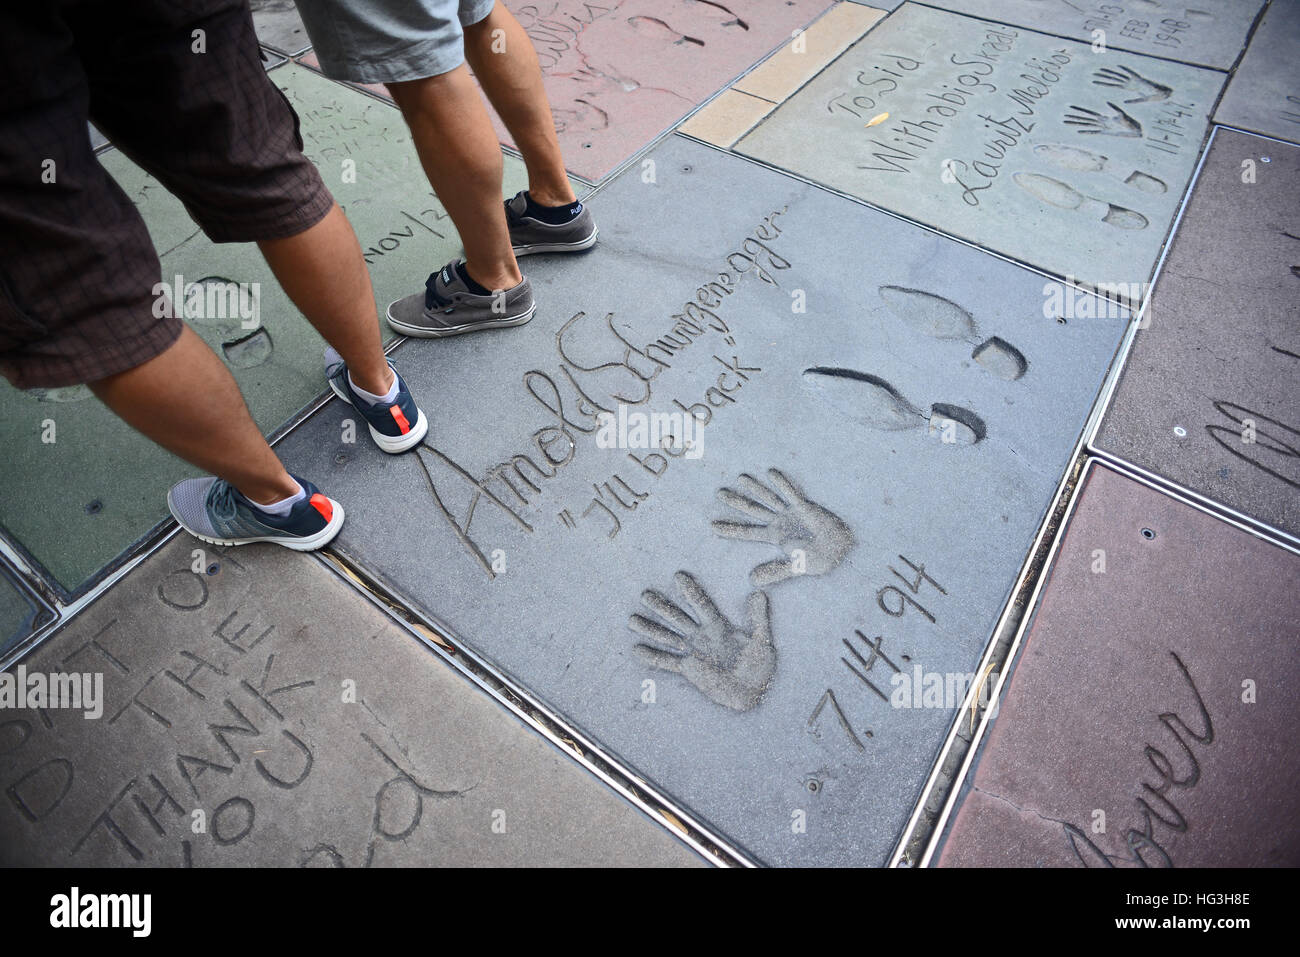 Arnold Schwarzenegger´s ´s prints at Grauman's Chinese Theatre, Hollywood Boulevard. Stock Photo